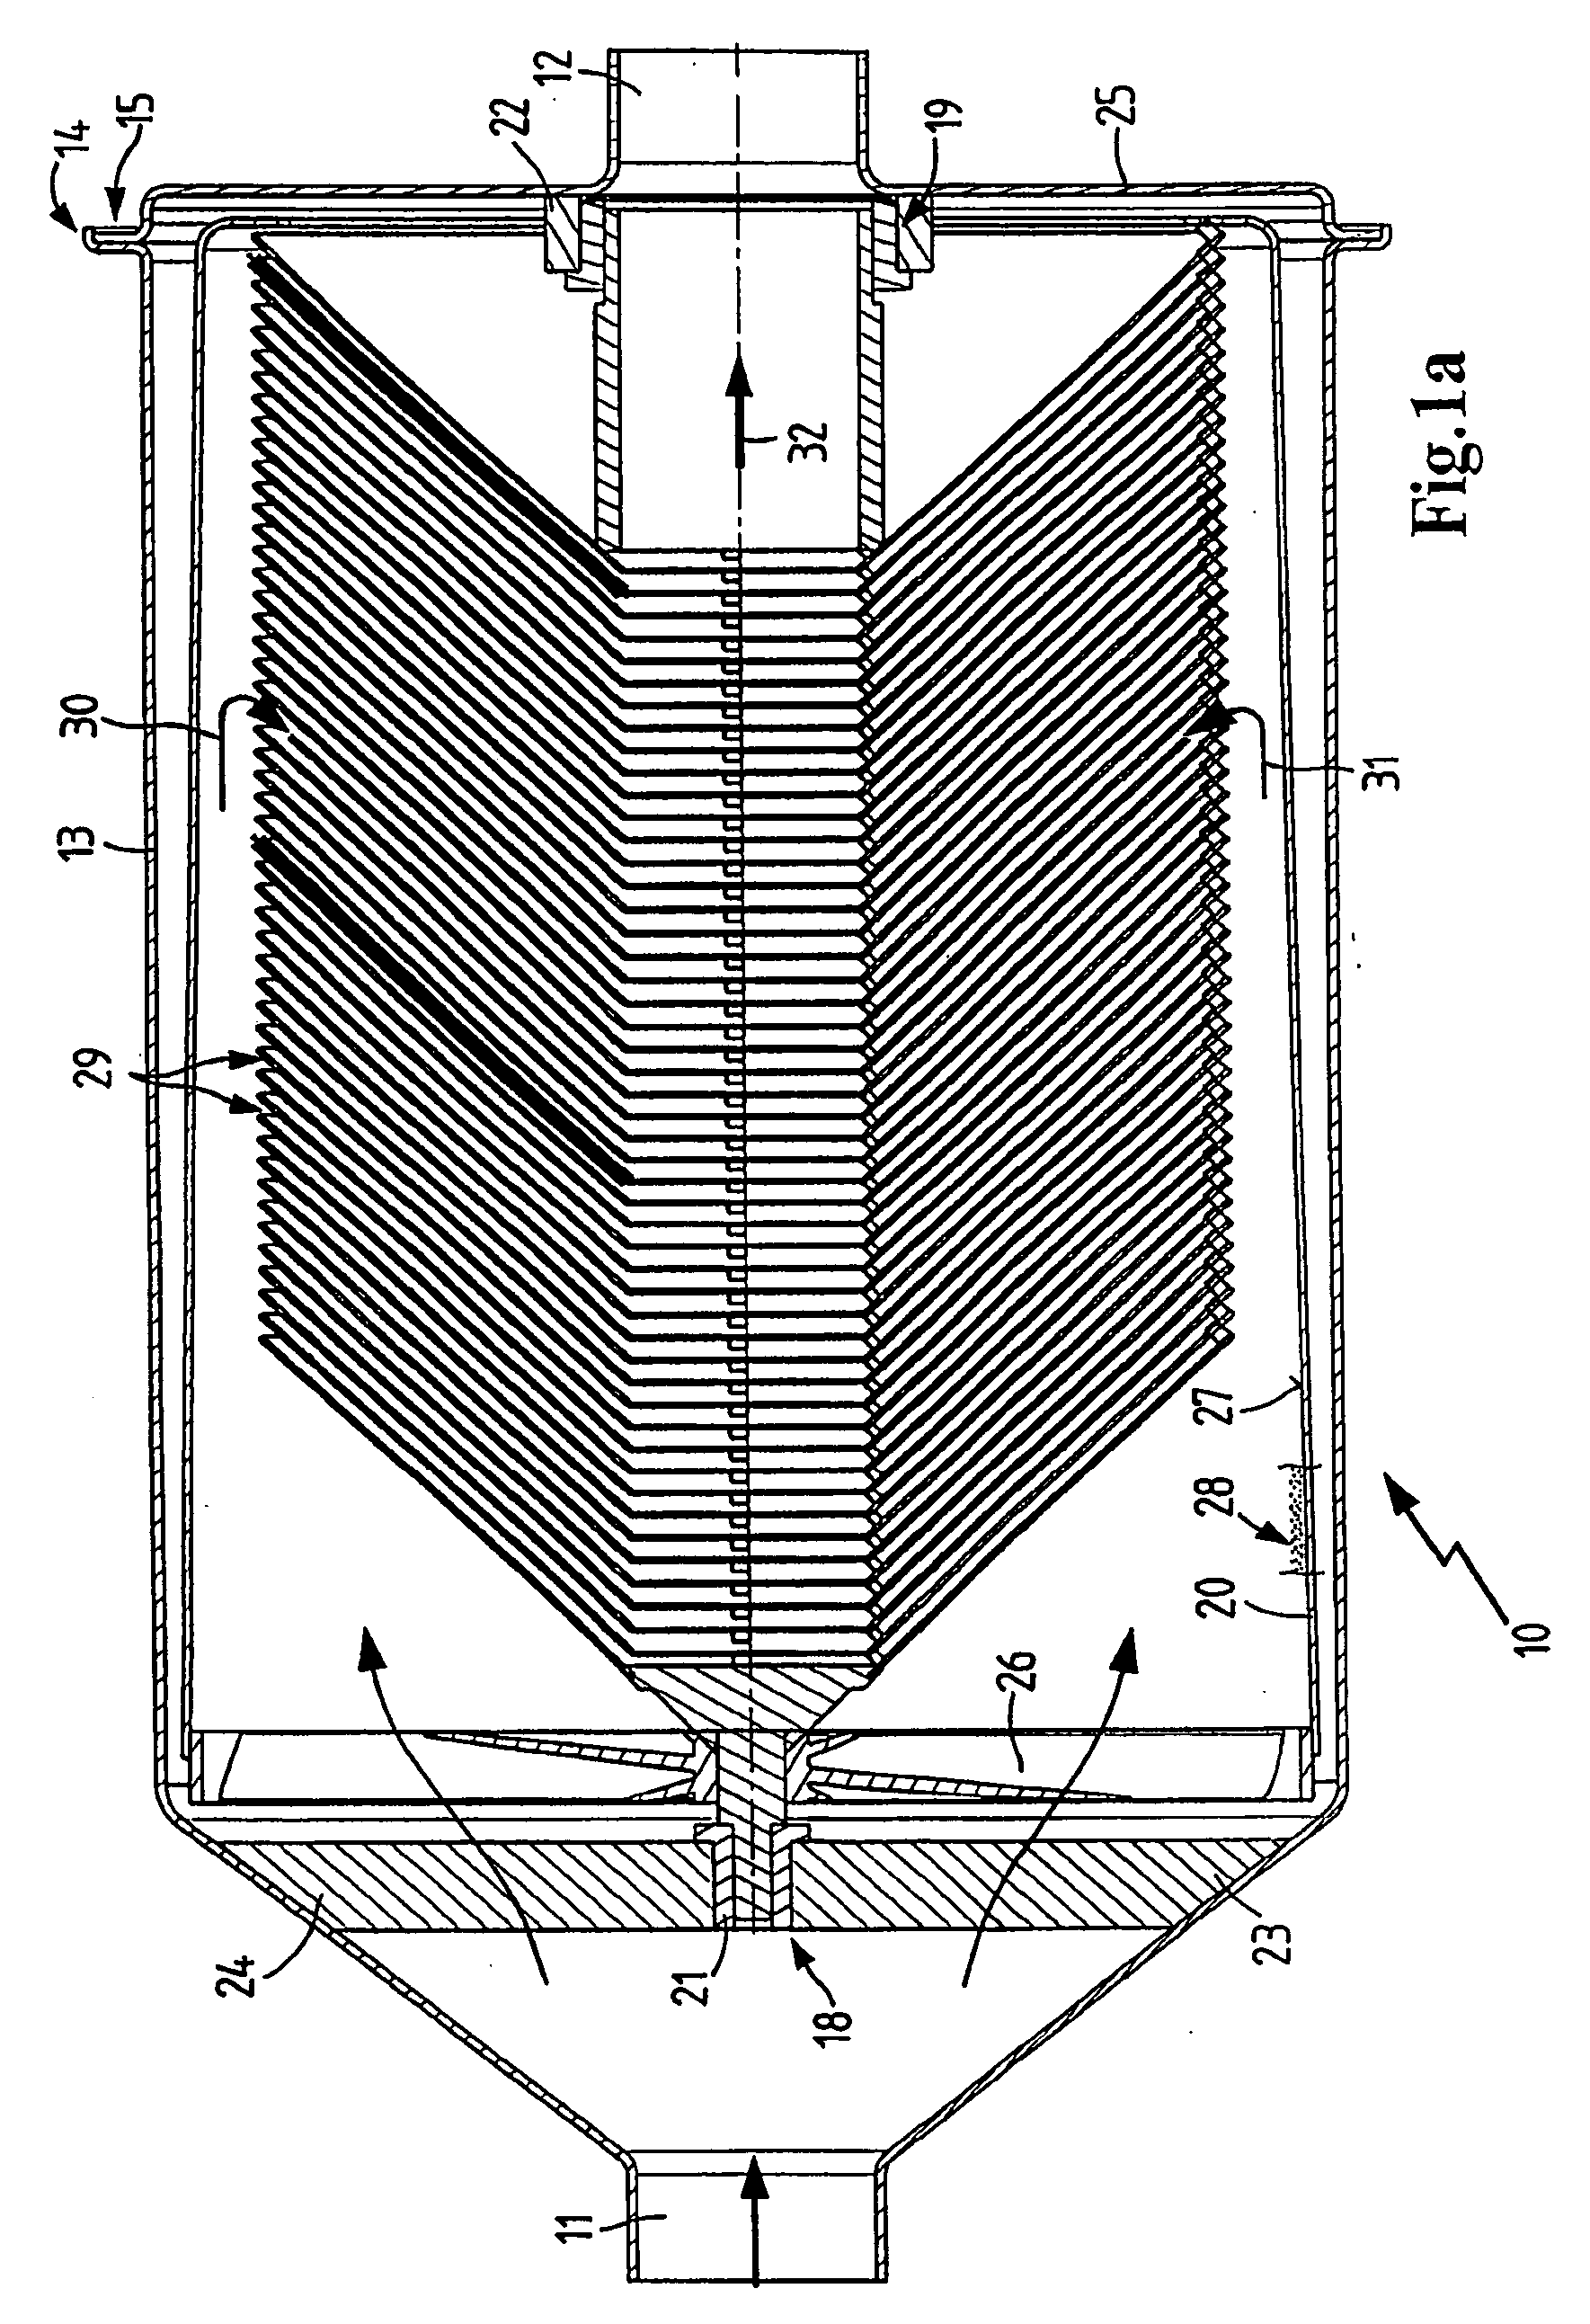 Centrifuge for separating soot from the exhaust of an internal combustion engine